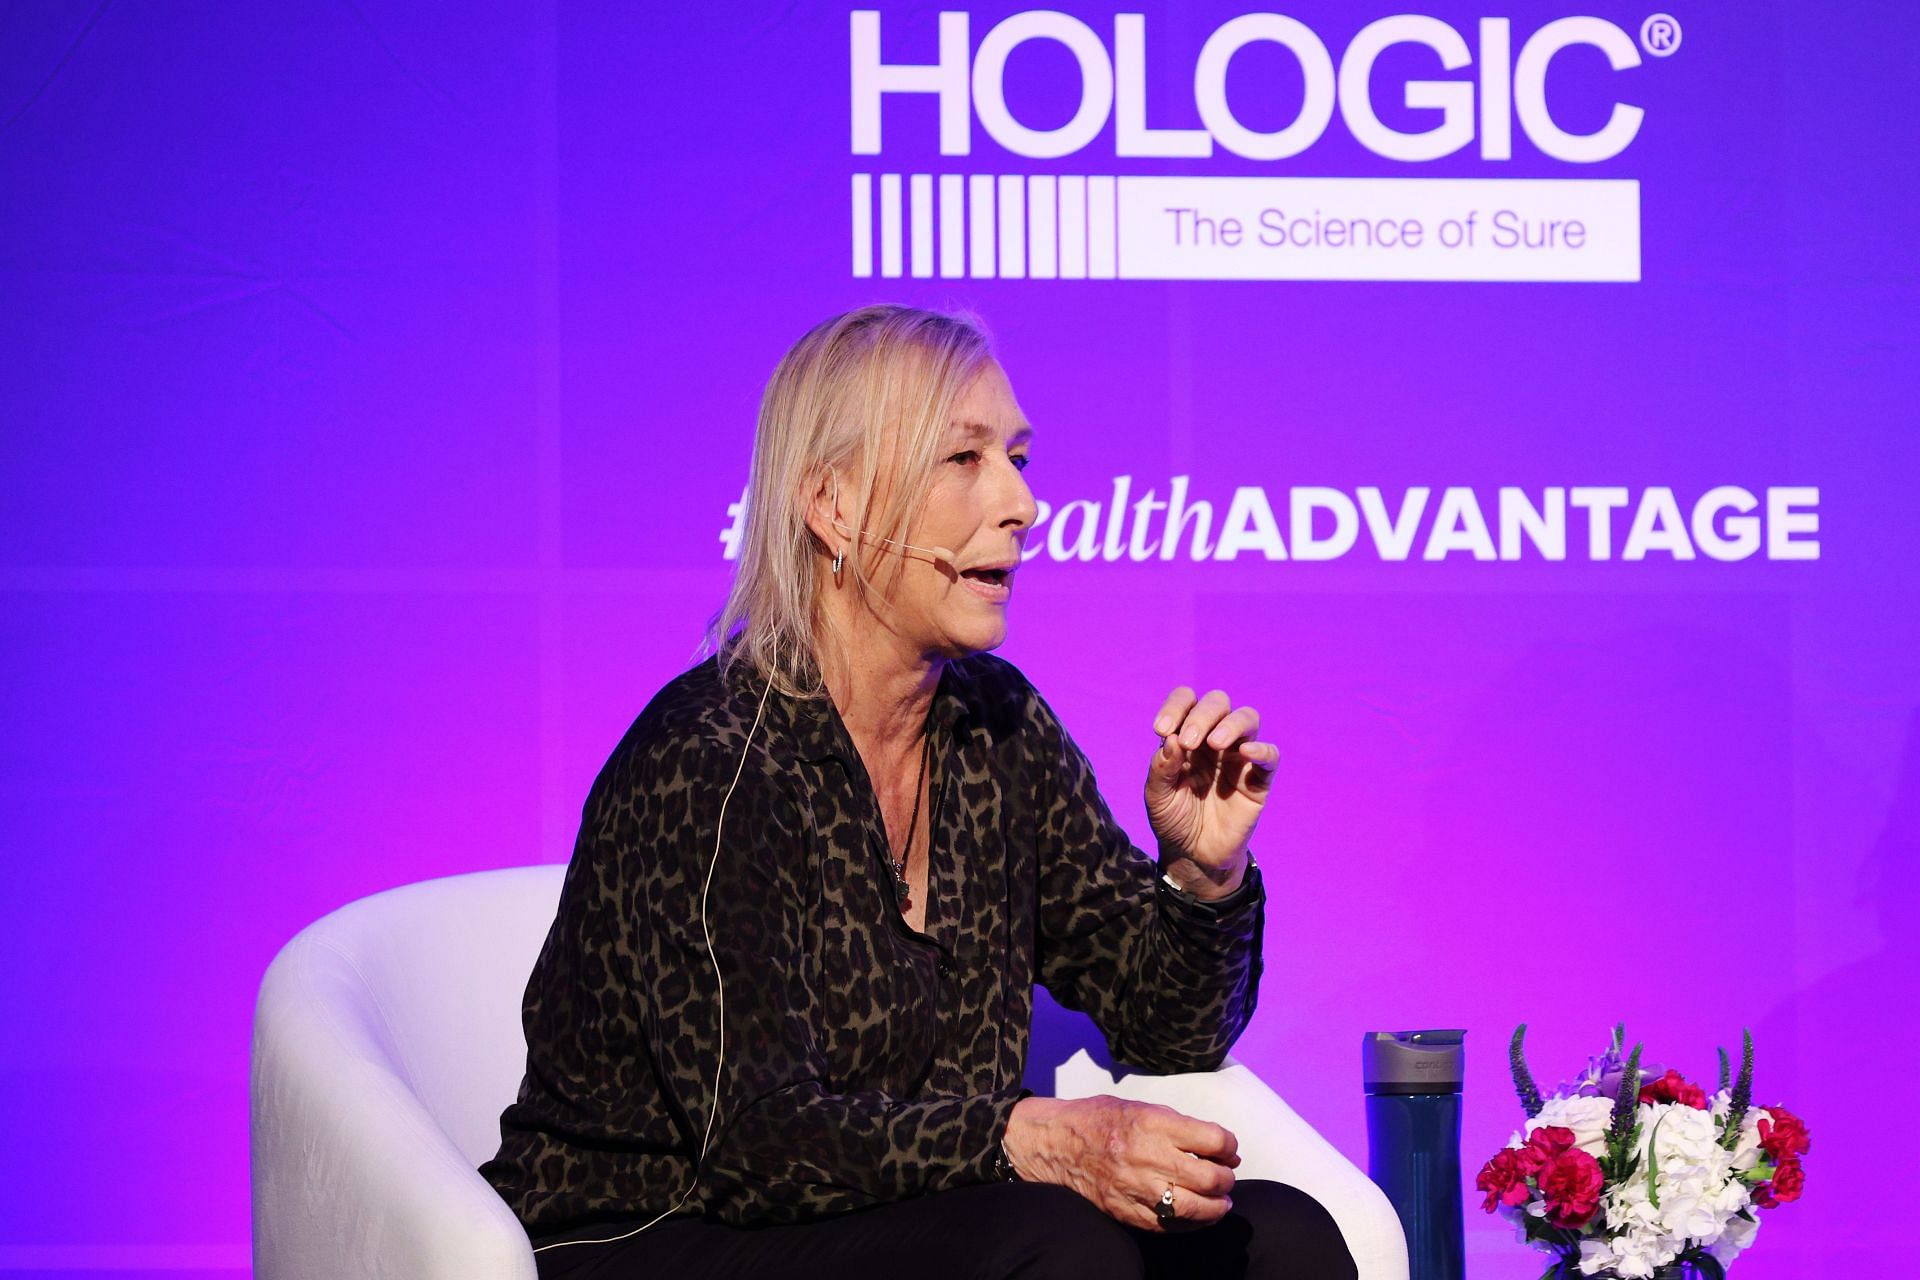 WTA&#039;s &quot;Her Health Advantage&quot; Event presented by Hologic